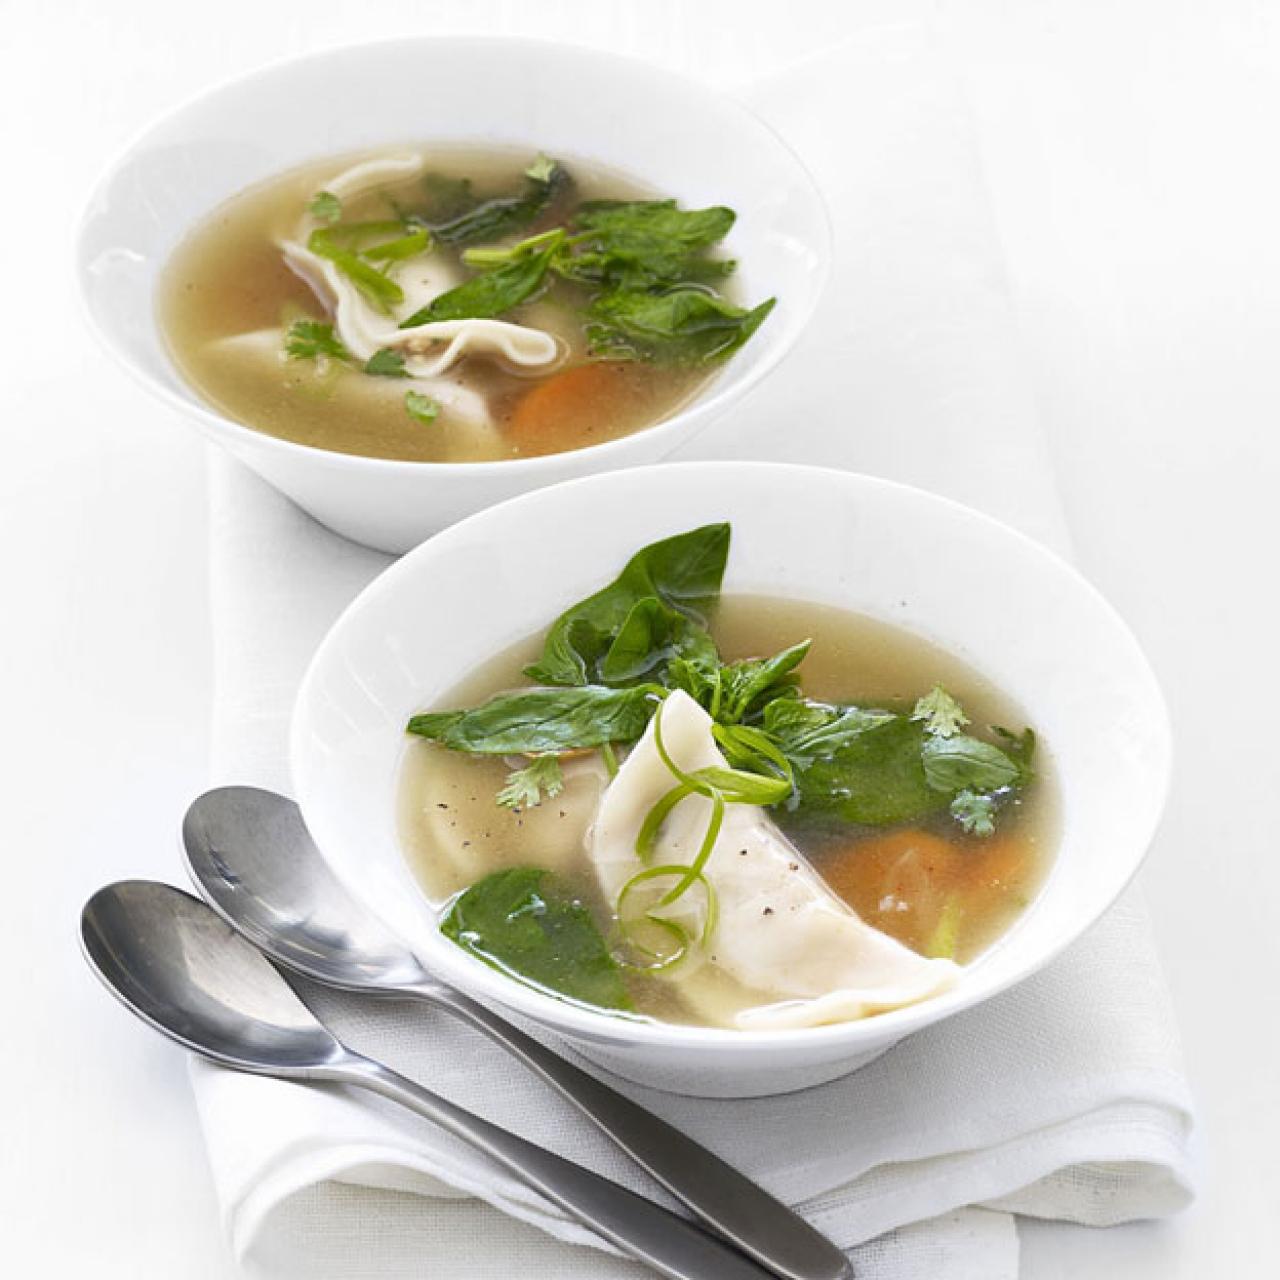 Chinese Dumpling Soup (上湯水餃), Christine's Recipes: Easy Chinese Recipes